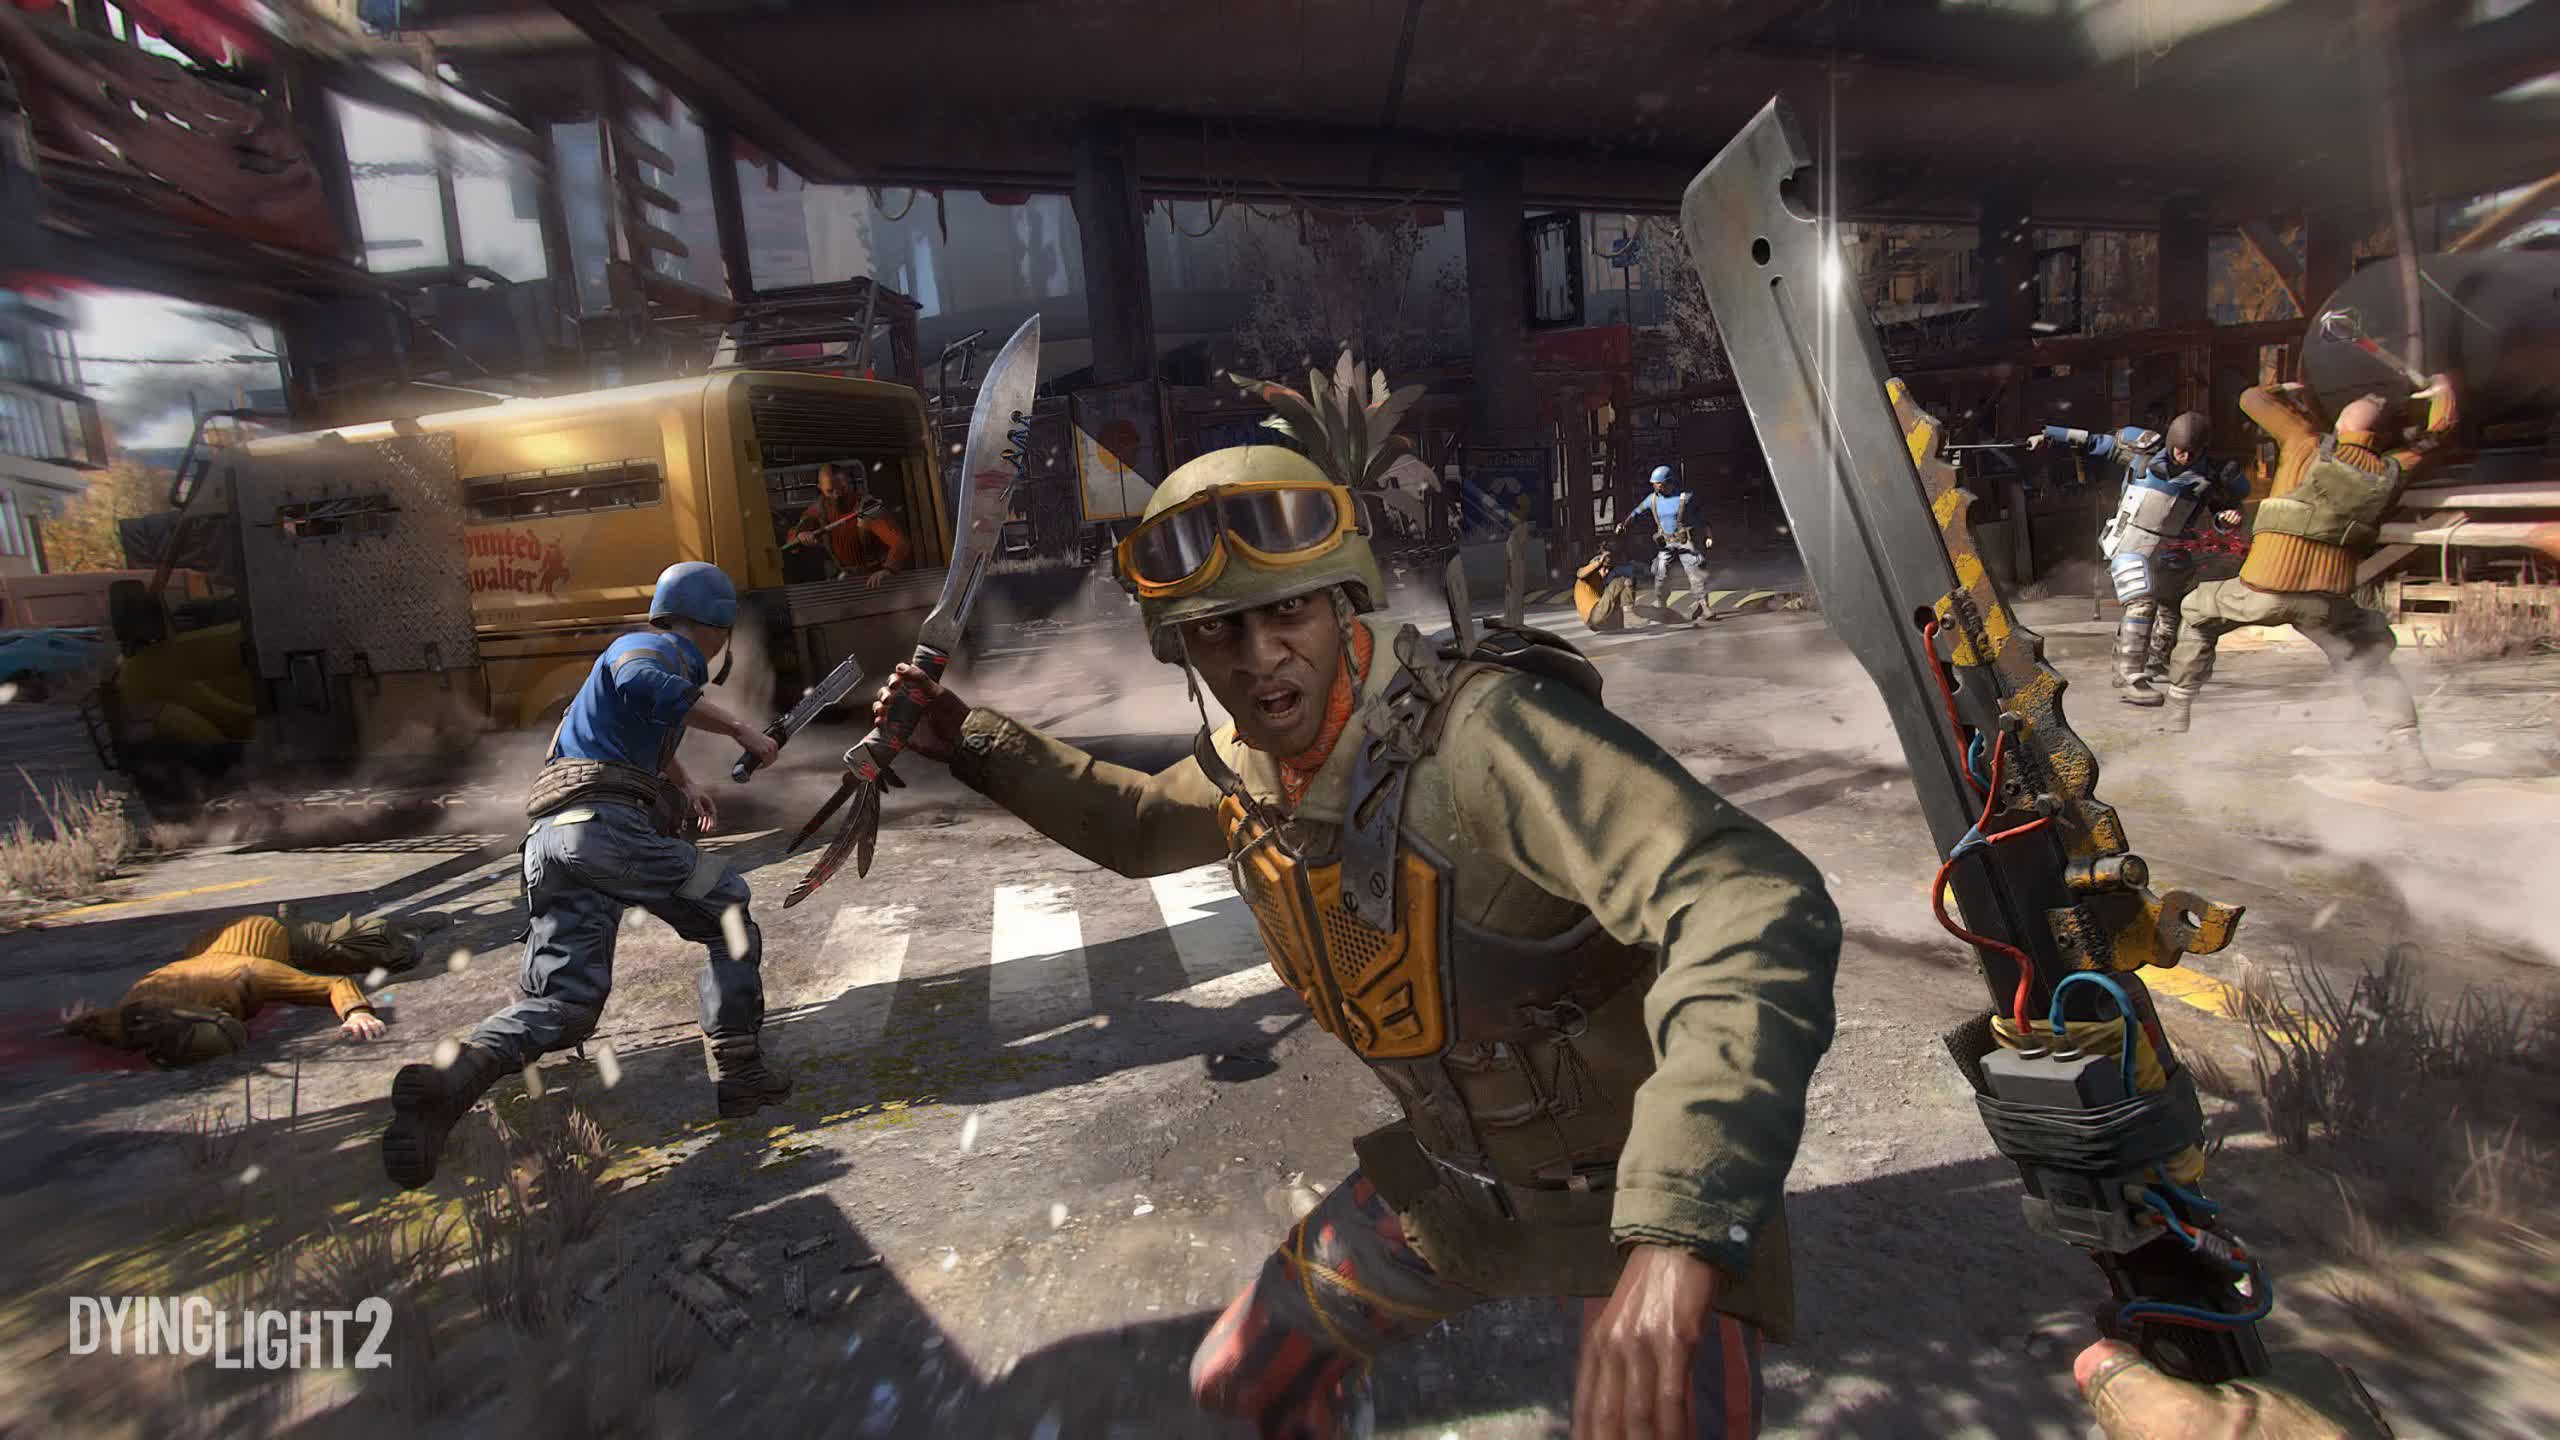 Techland also included an Easter egg with a finger gun in Dying Light 2 thumbnail